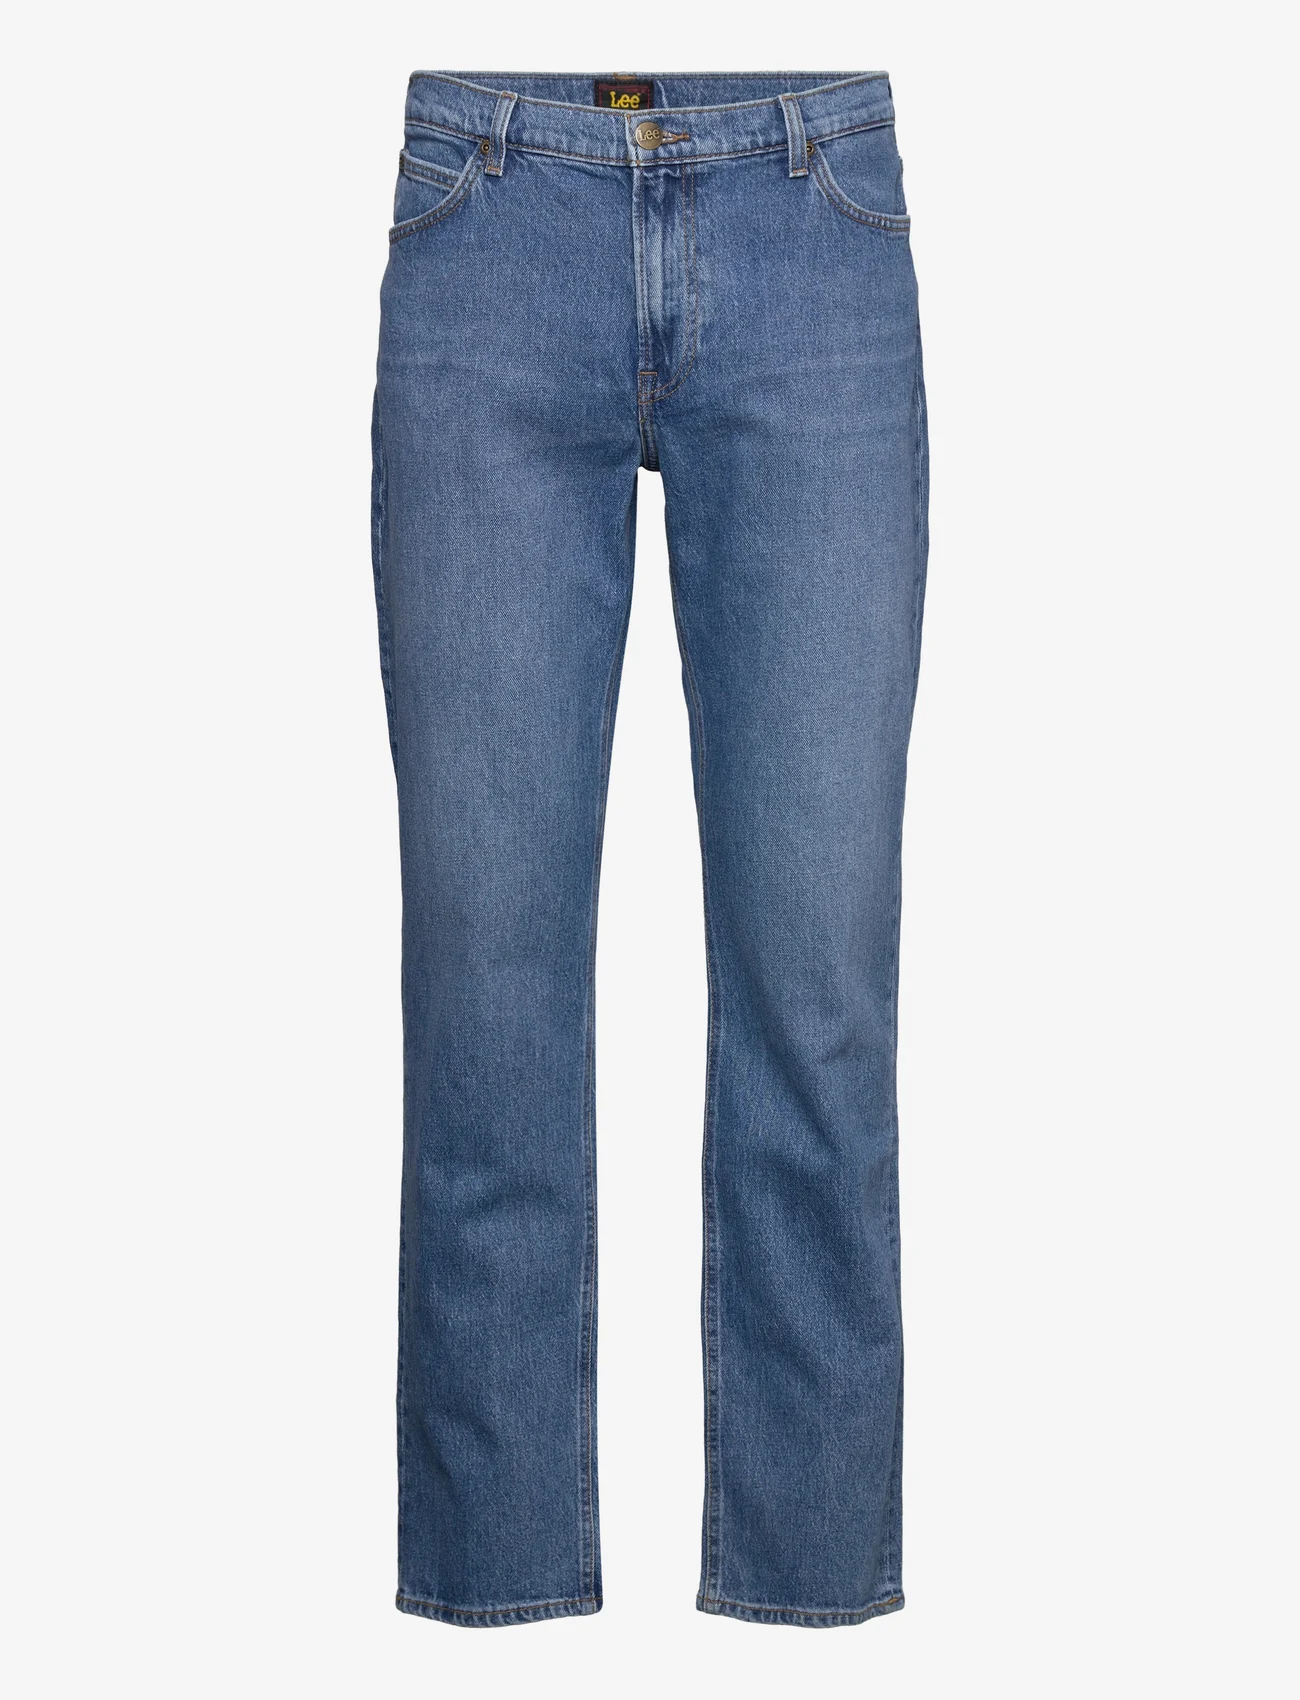 Lee Jeans - WEST - regular jeans - into the blue worn - 0